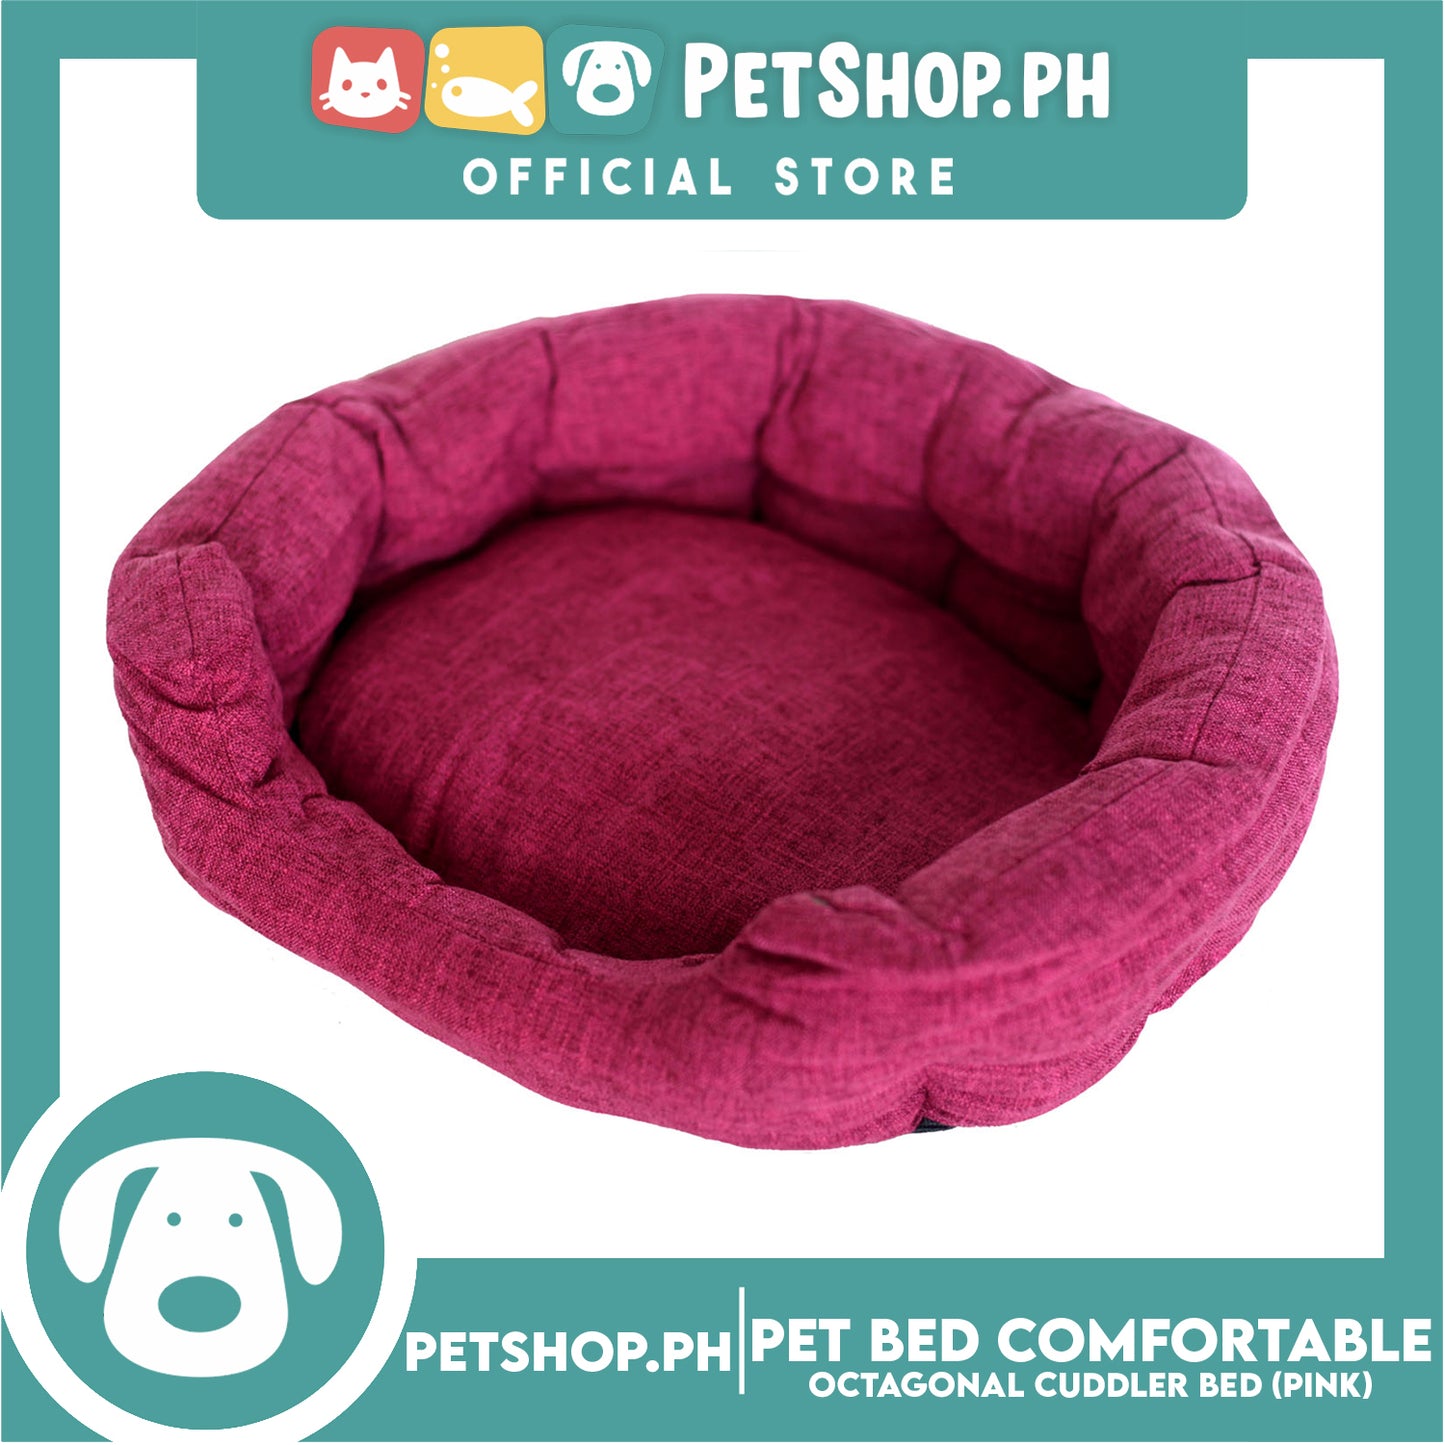 Pet Bed Comfortable Octagonal Cuddler Dog Bed 55x47x18cm Medium for Dogs & Cats (Pink)